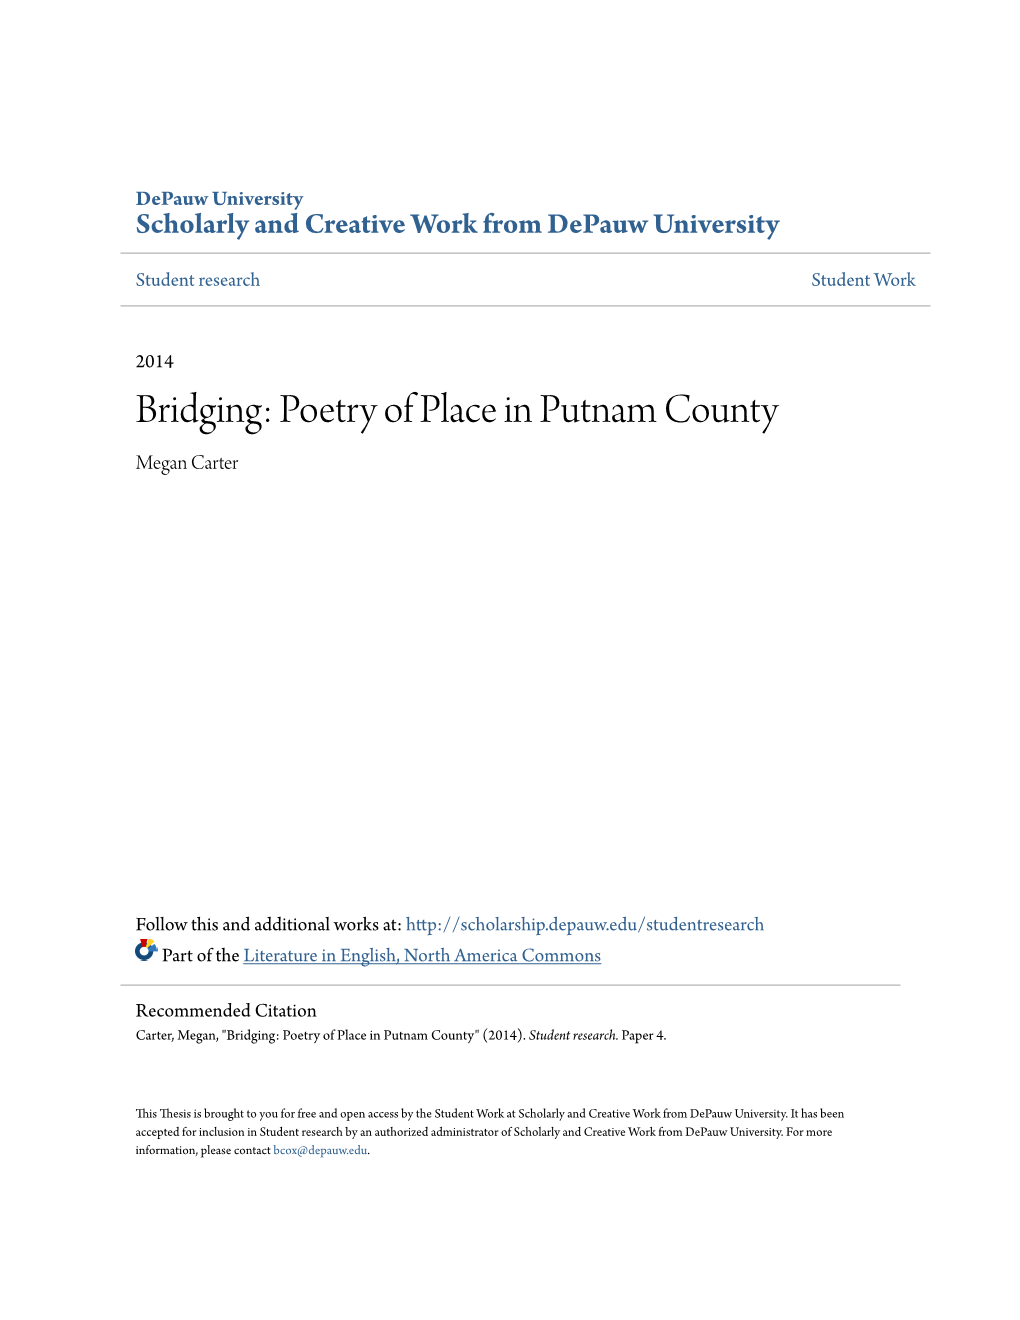 Poetry of Place in Putnam County Megan Carter